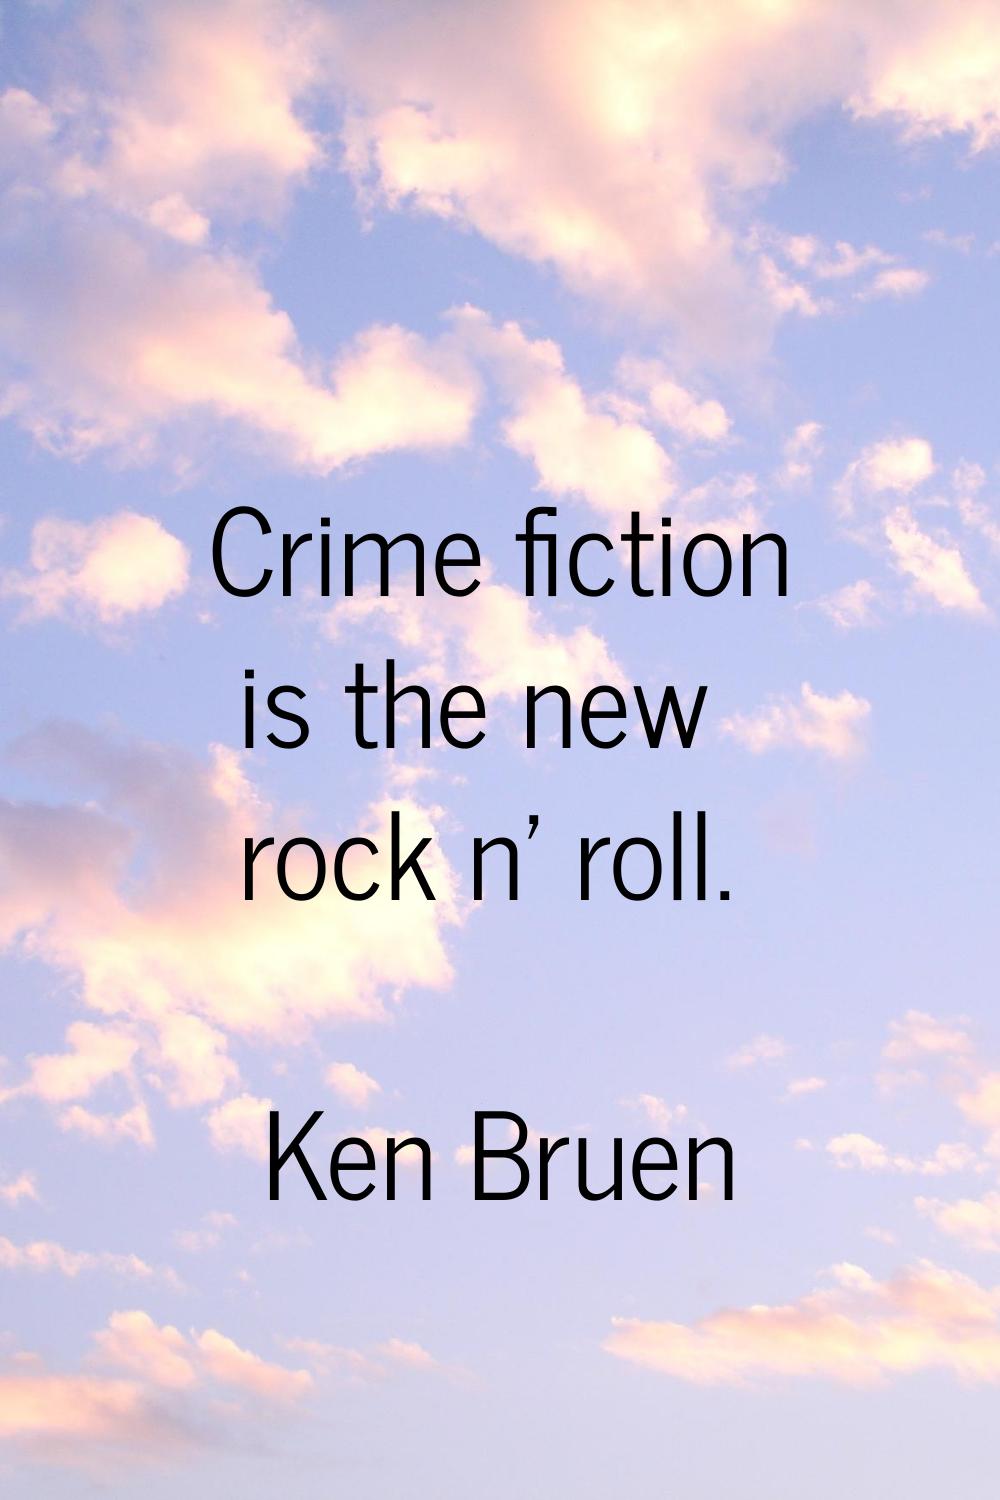 Crime fiction is the new rock n' roll.